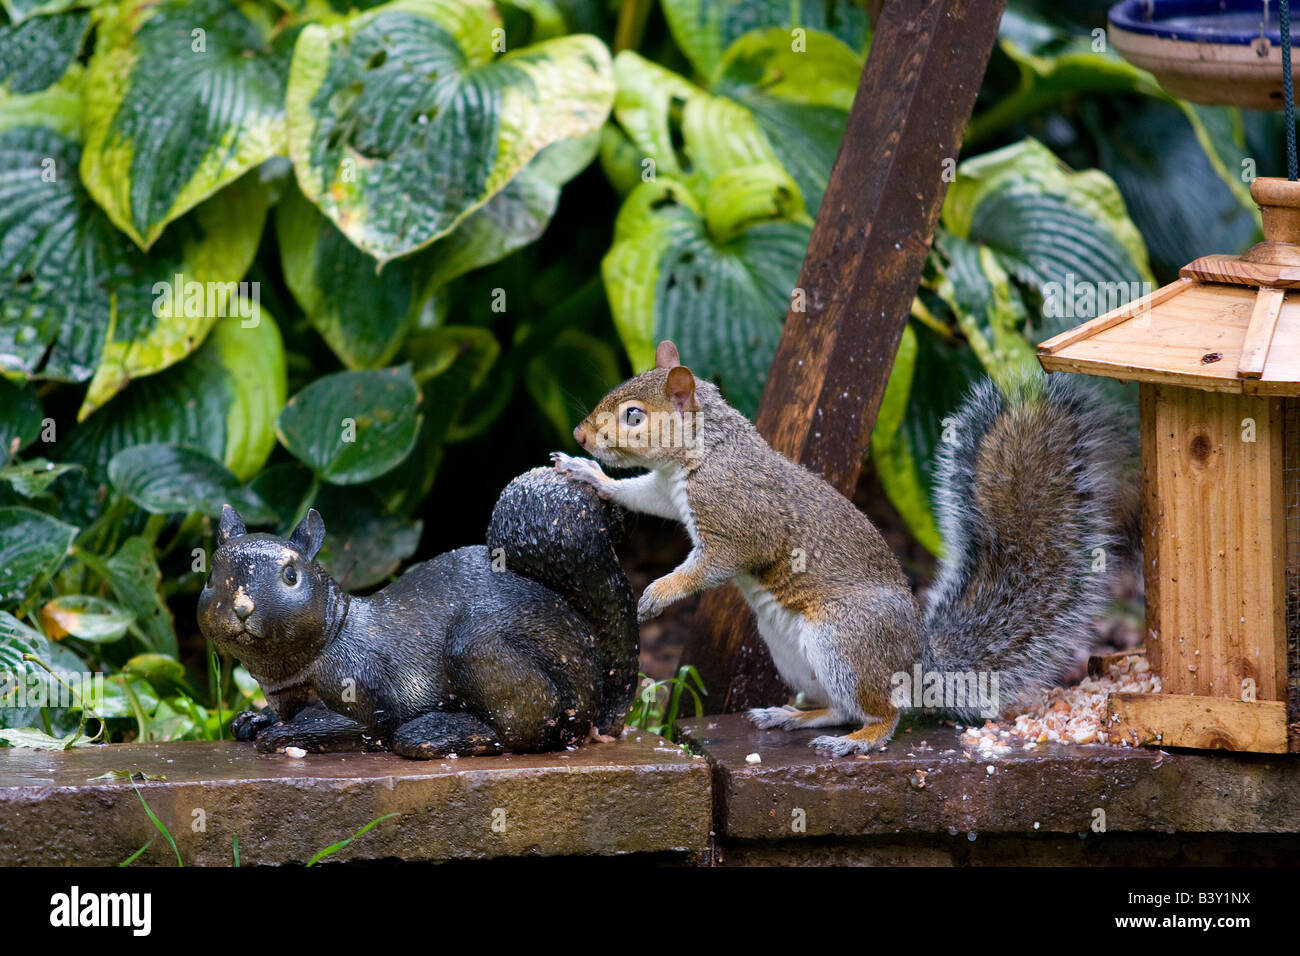 squirrel leaning on a stone squirrel on a garden wall Stock Photo